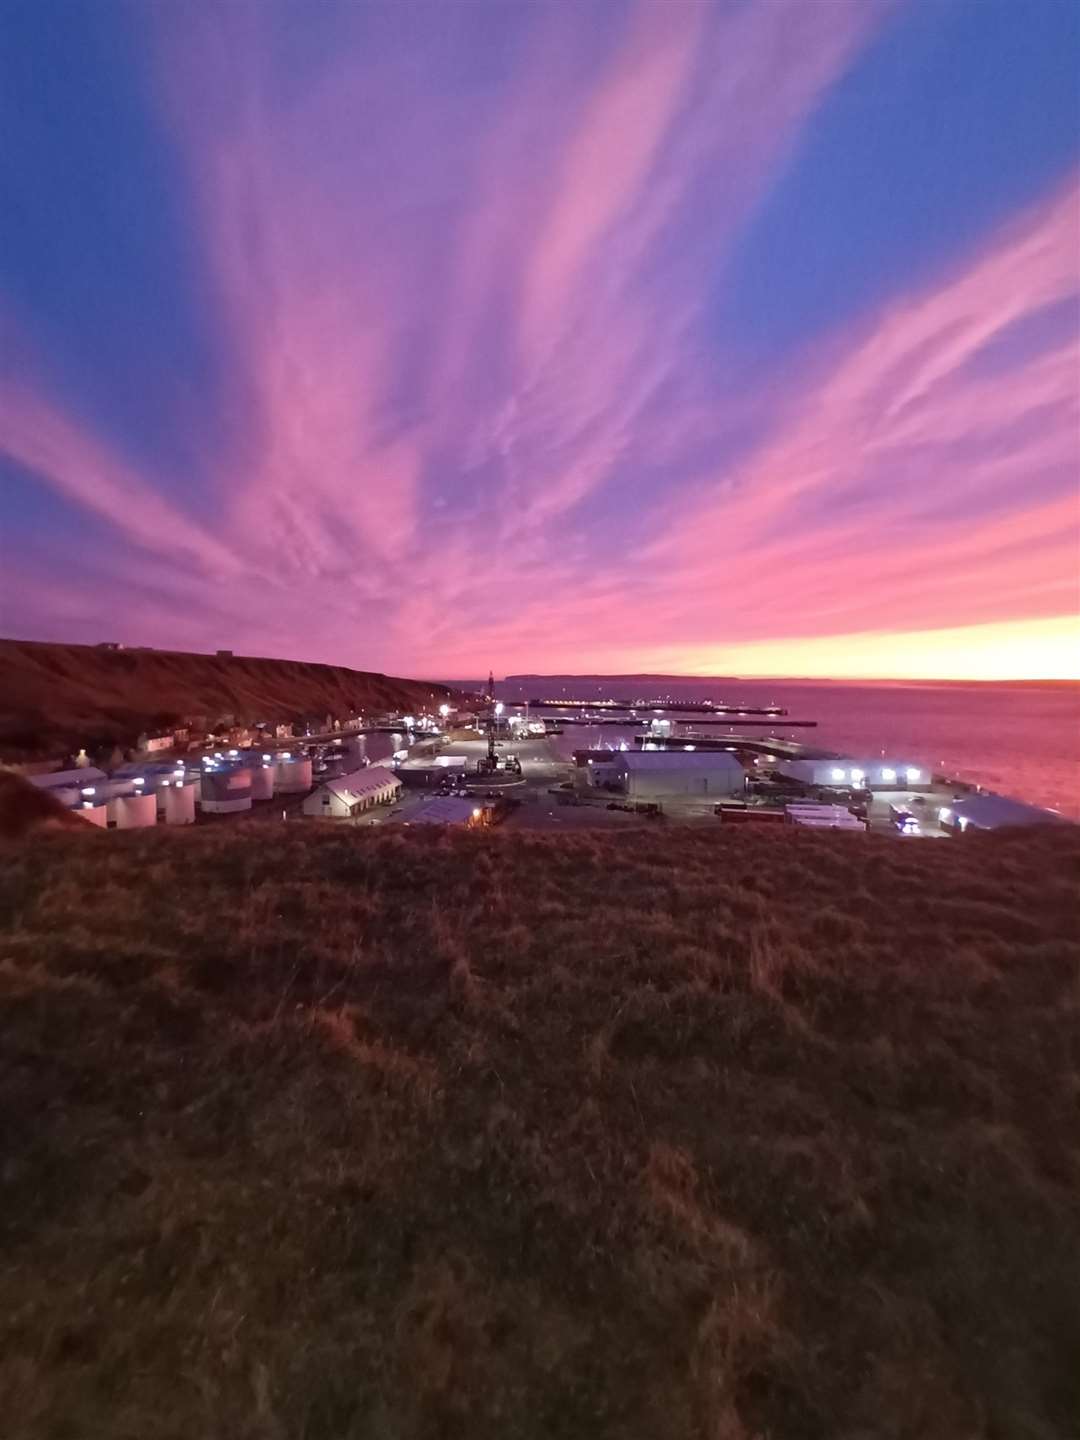 Sunrise over Scrabster on the day of the Focus North event earlier this month.